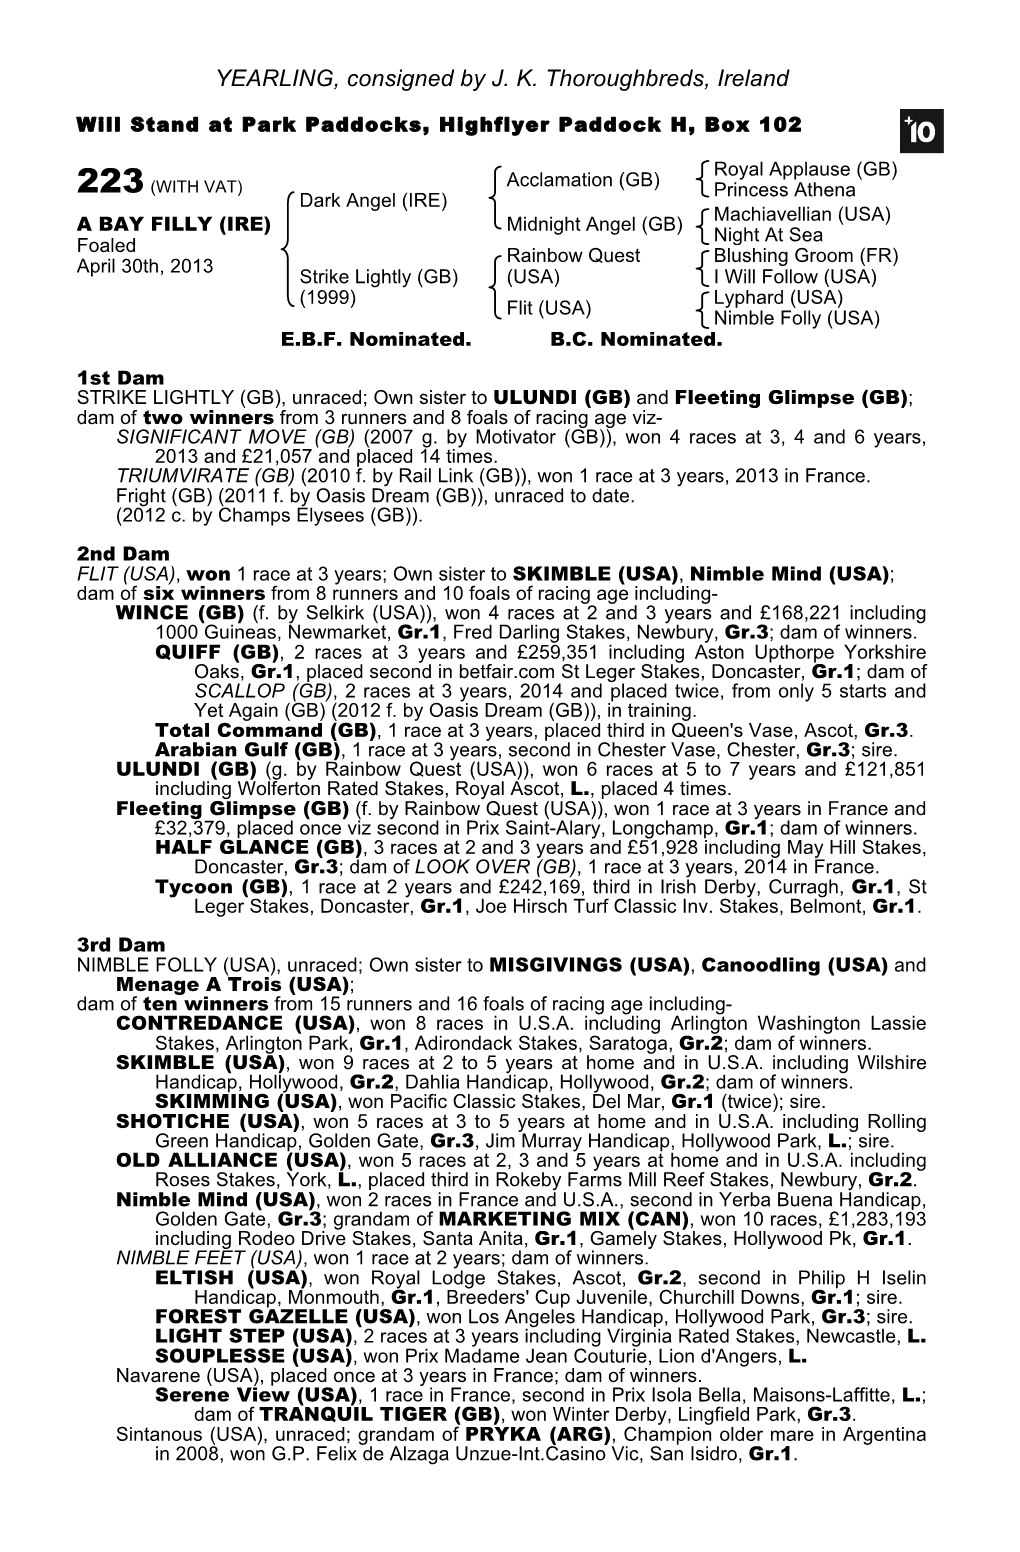 YEARLING, Consigned by J. K. Thoroughbreds, Ireland